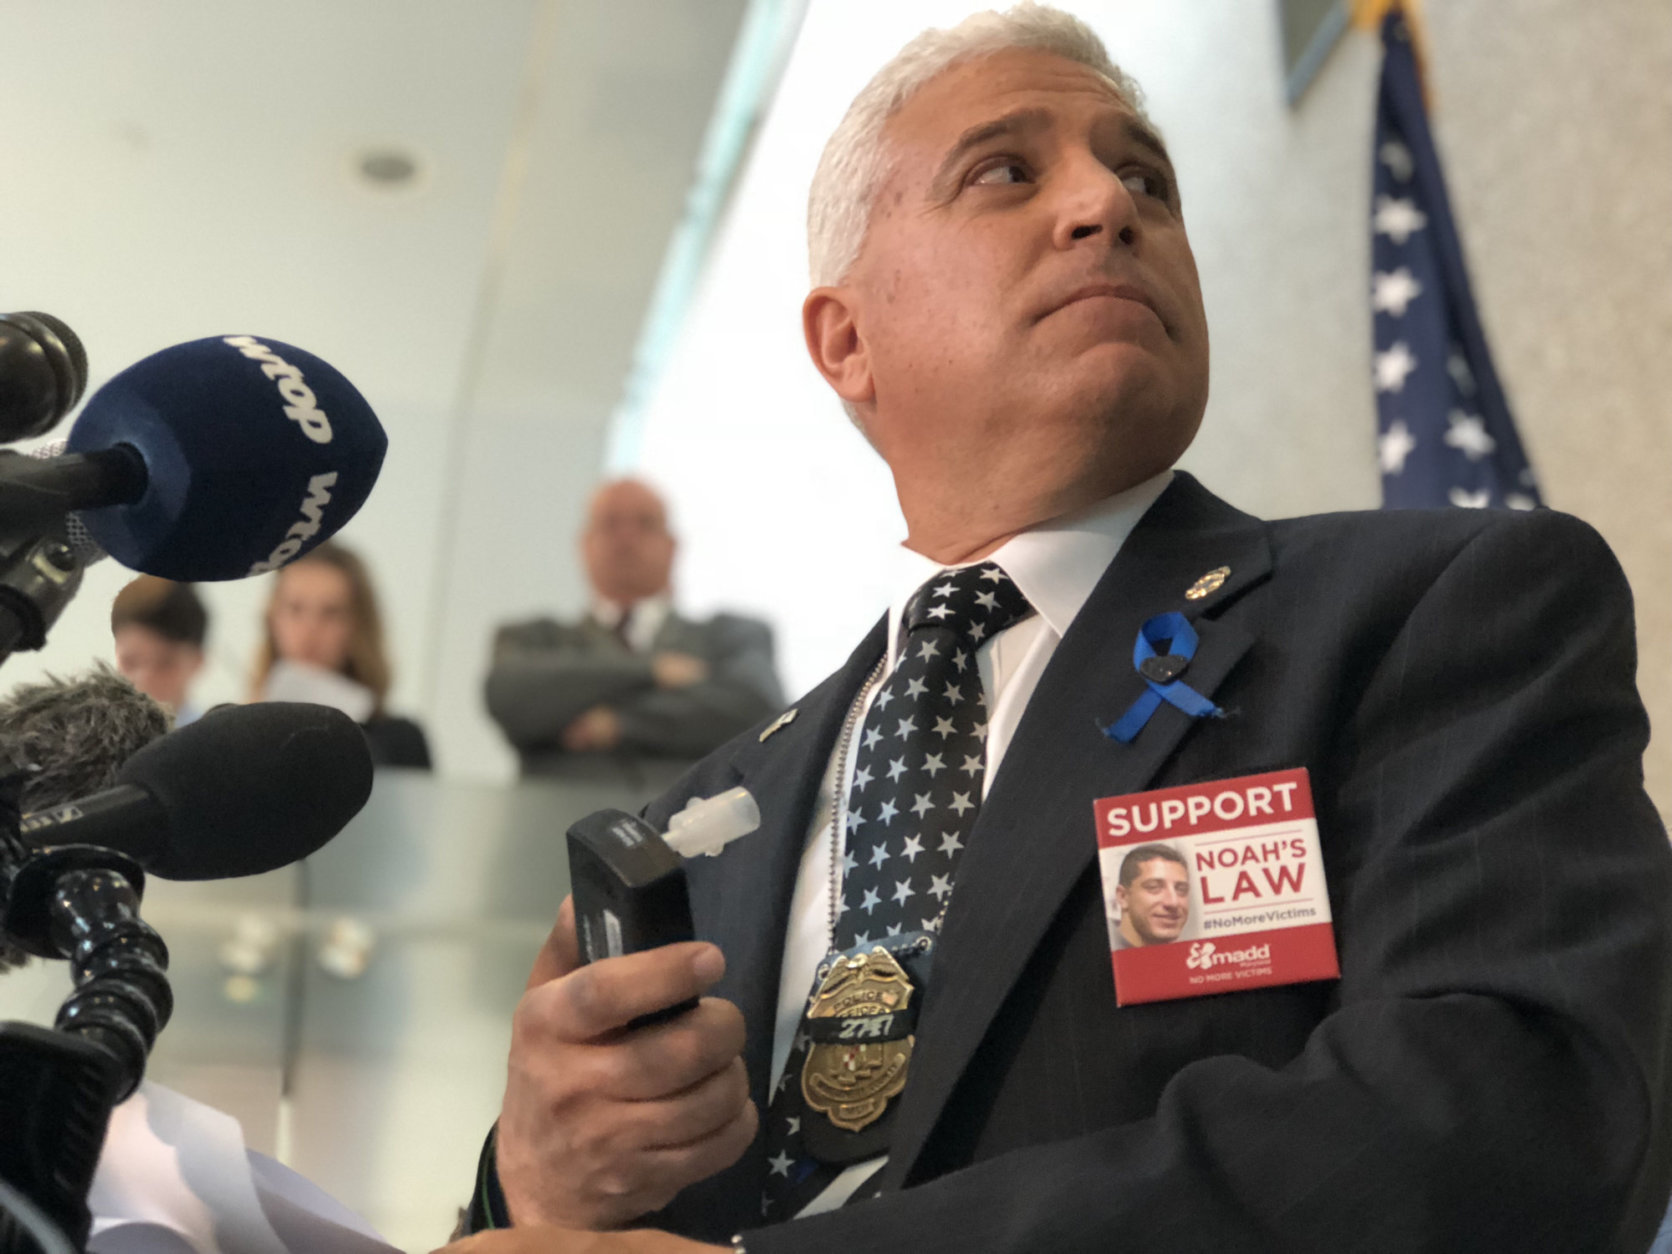 Rich Leotta announces the "Noah on patrol" court-watch program that will pressure judges into ordering interlock devices in all cases of DUI including cases where probation before judgement is ordered. (WTOP/Kate Ryan)